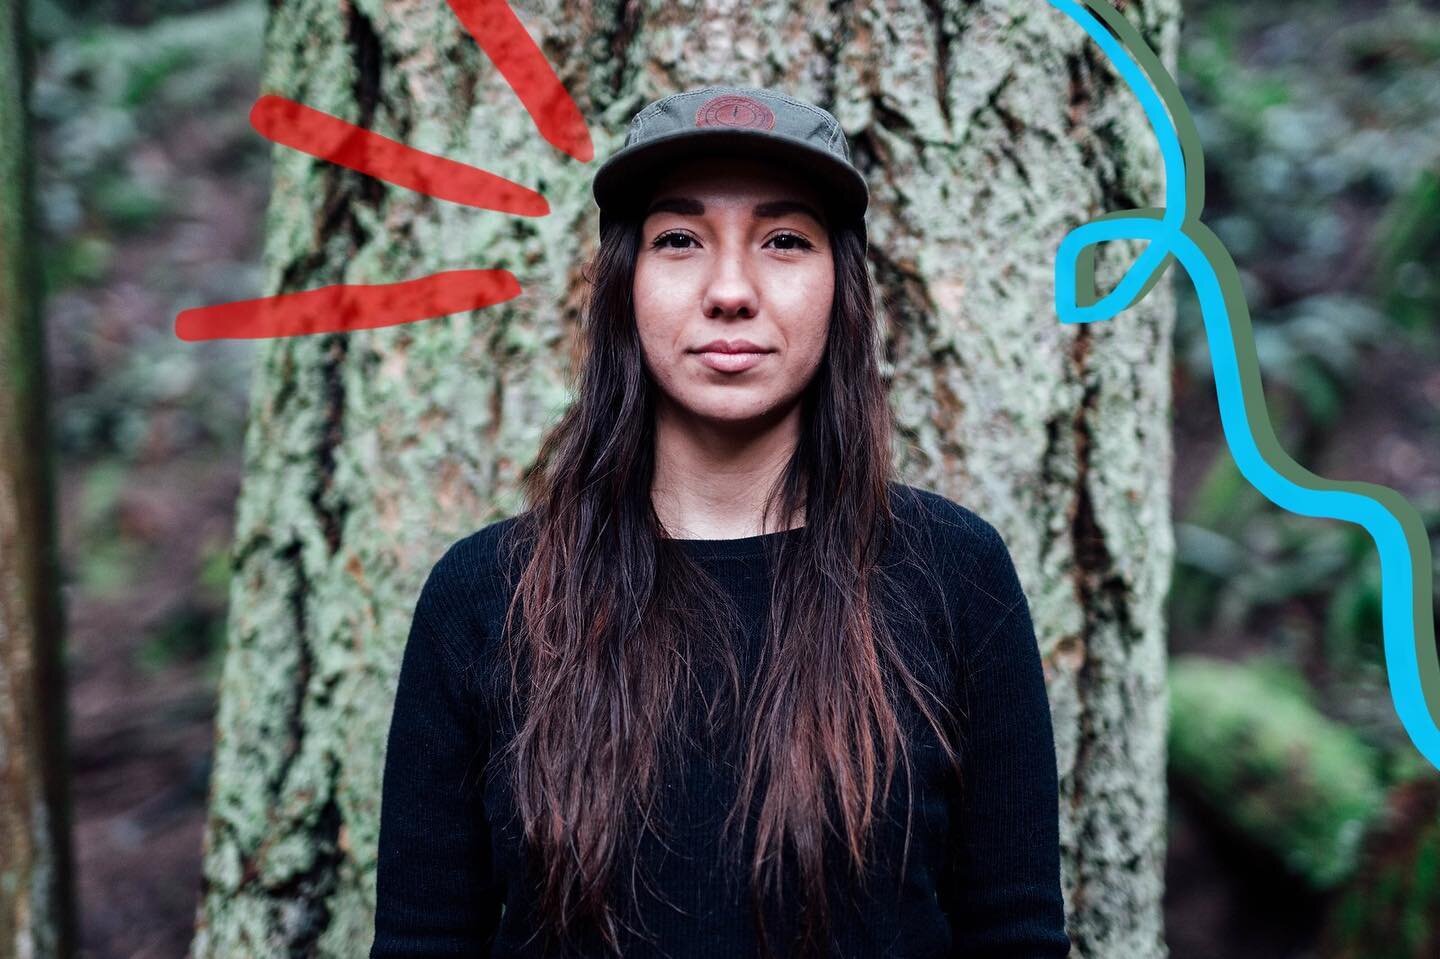 about our founder;

Myia Antone is a youth from the Squamish Nation, as well as proud Ukrainian roots. Growing up on her traditional territory, she has always felt connected to lands and waters she calls home. After completing her degree at UBC in En